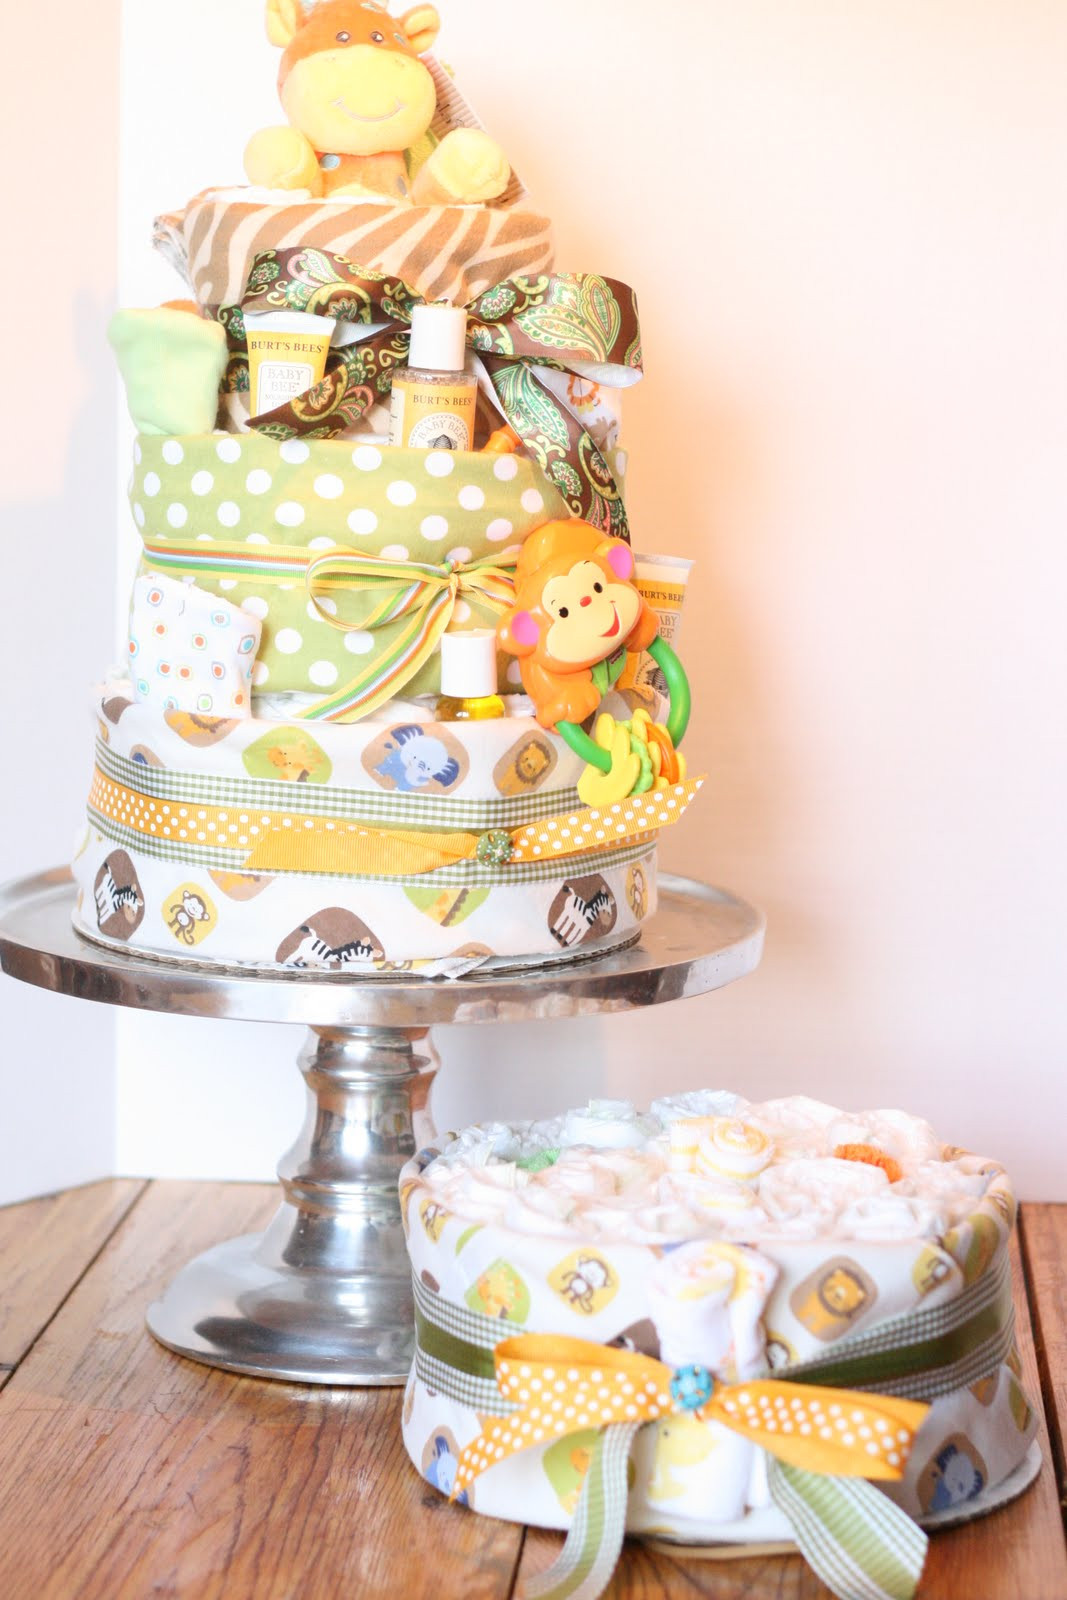 Baby Shower DIY Gifts
 A Little Junk In My Trunk How to Make a Diaper Cake